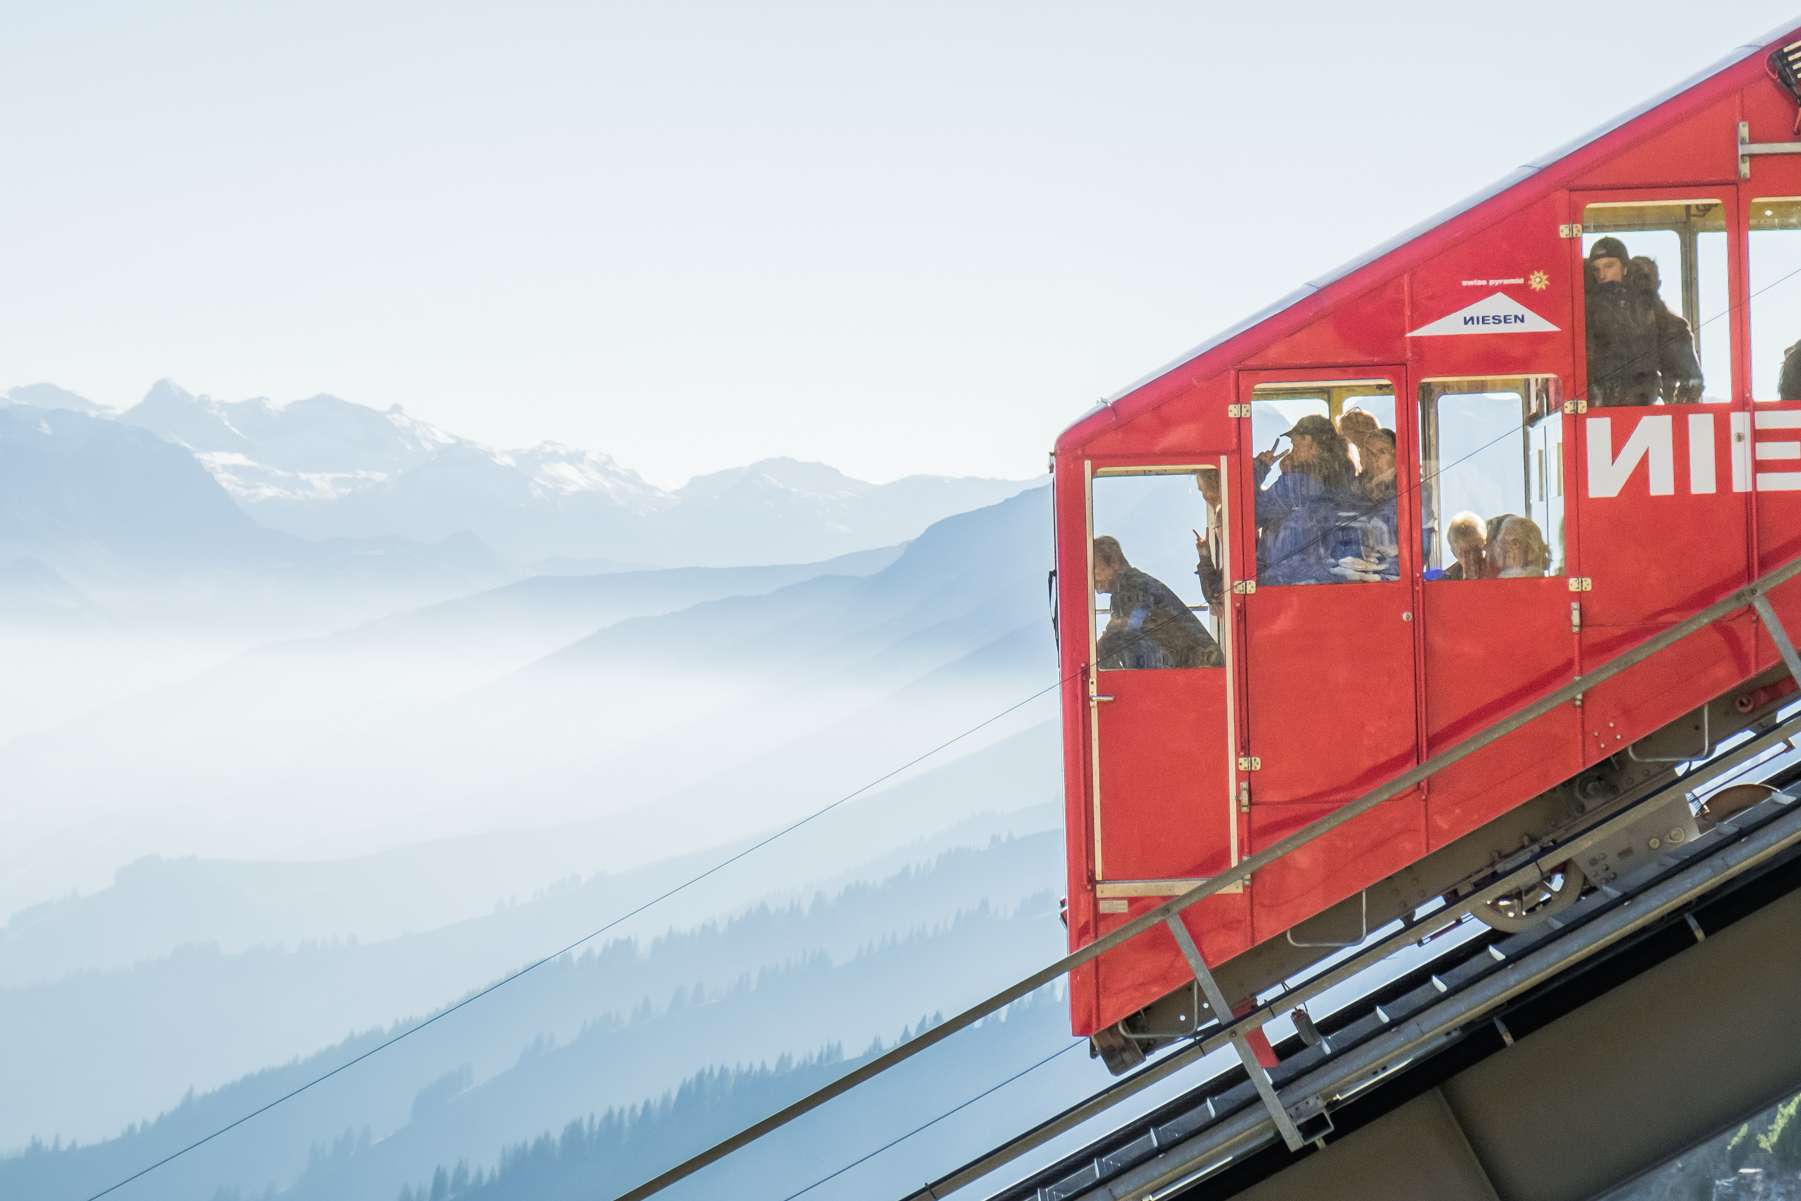 Super closeup of the Niesenbahn with people looking out the windows